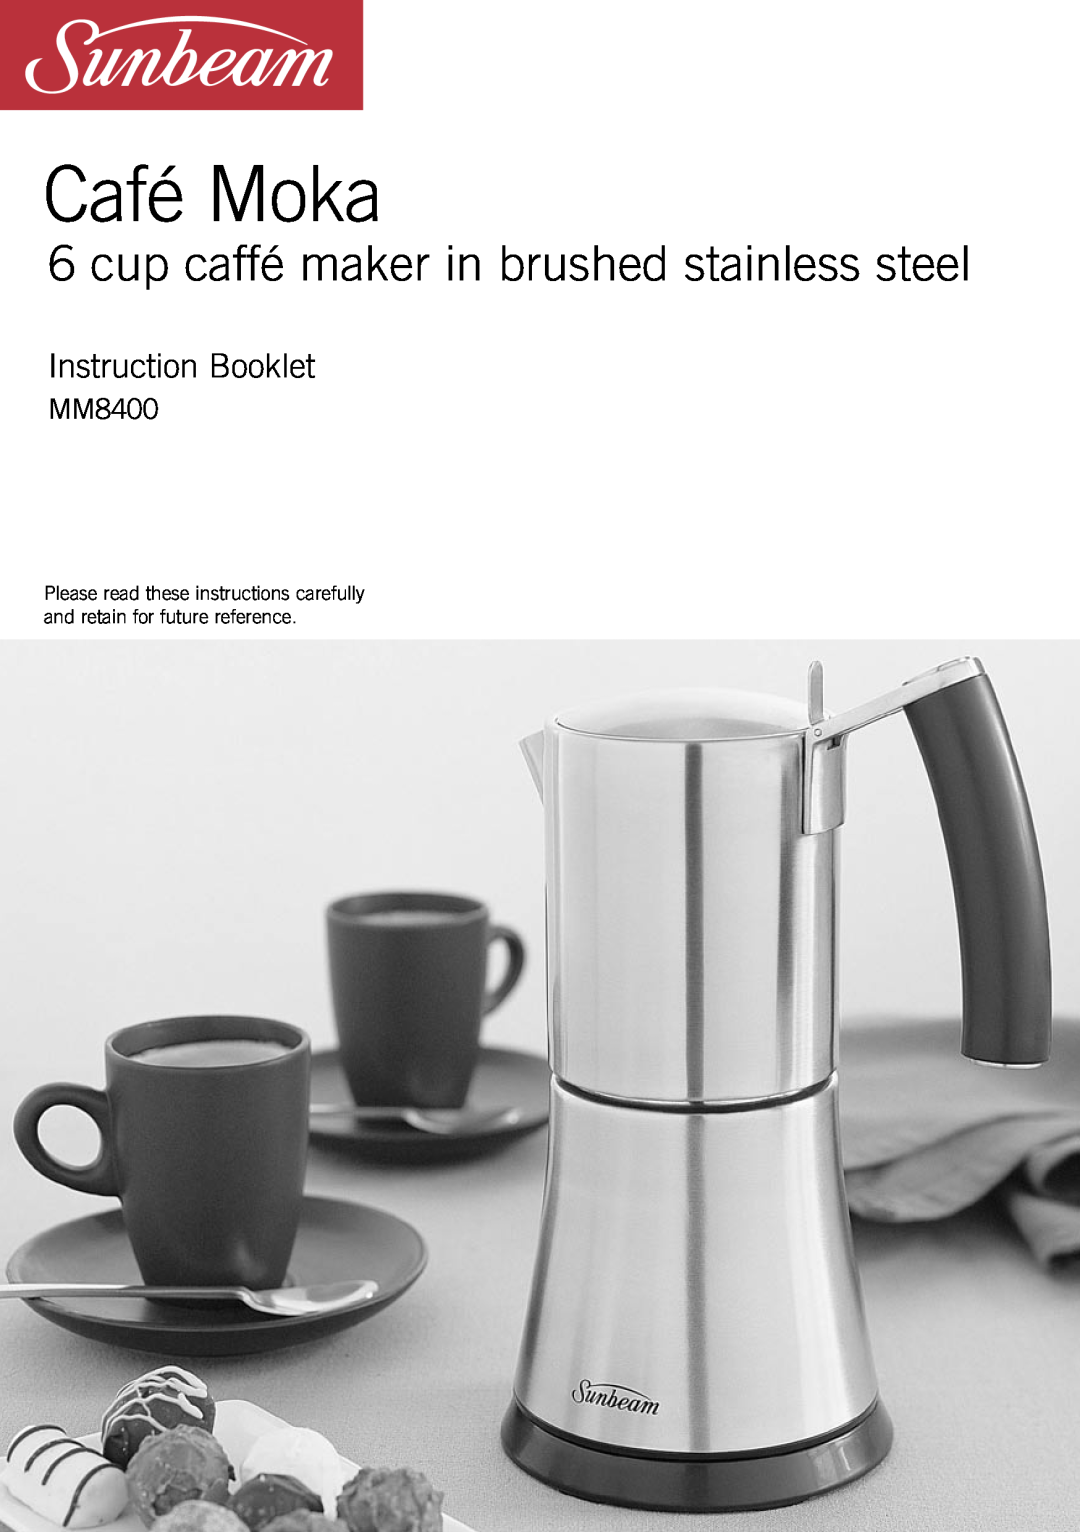 Sunbeam MM8400 manual Café Moka, cup caffé maker in brushed stainless steel, Instruction Booklet 